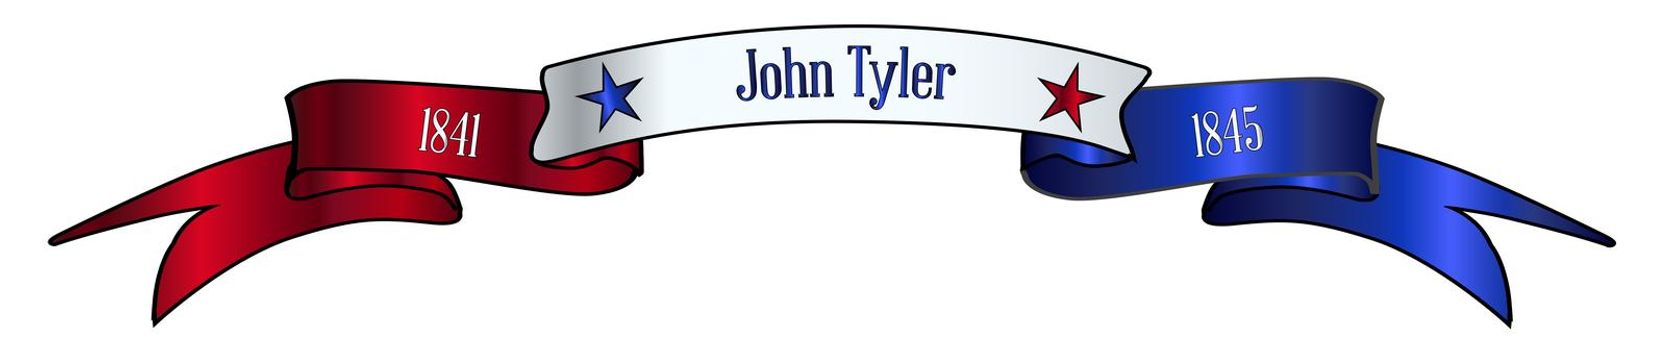 A red white and blue satin or silk ribbon banner with the text John Tyler and stars and date in office